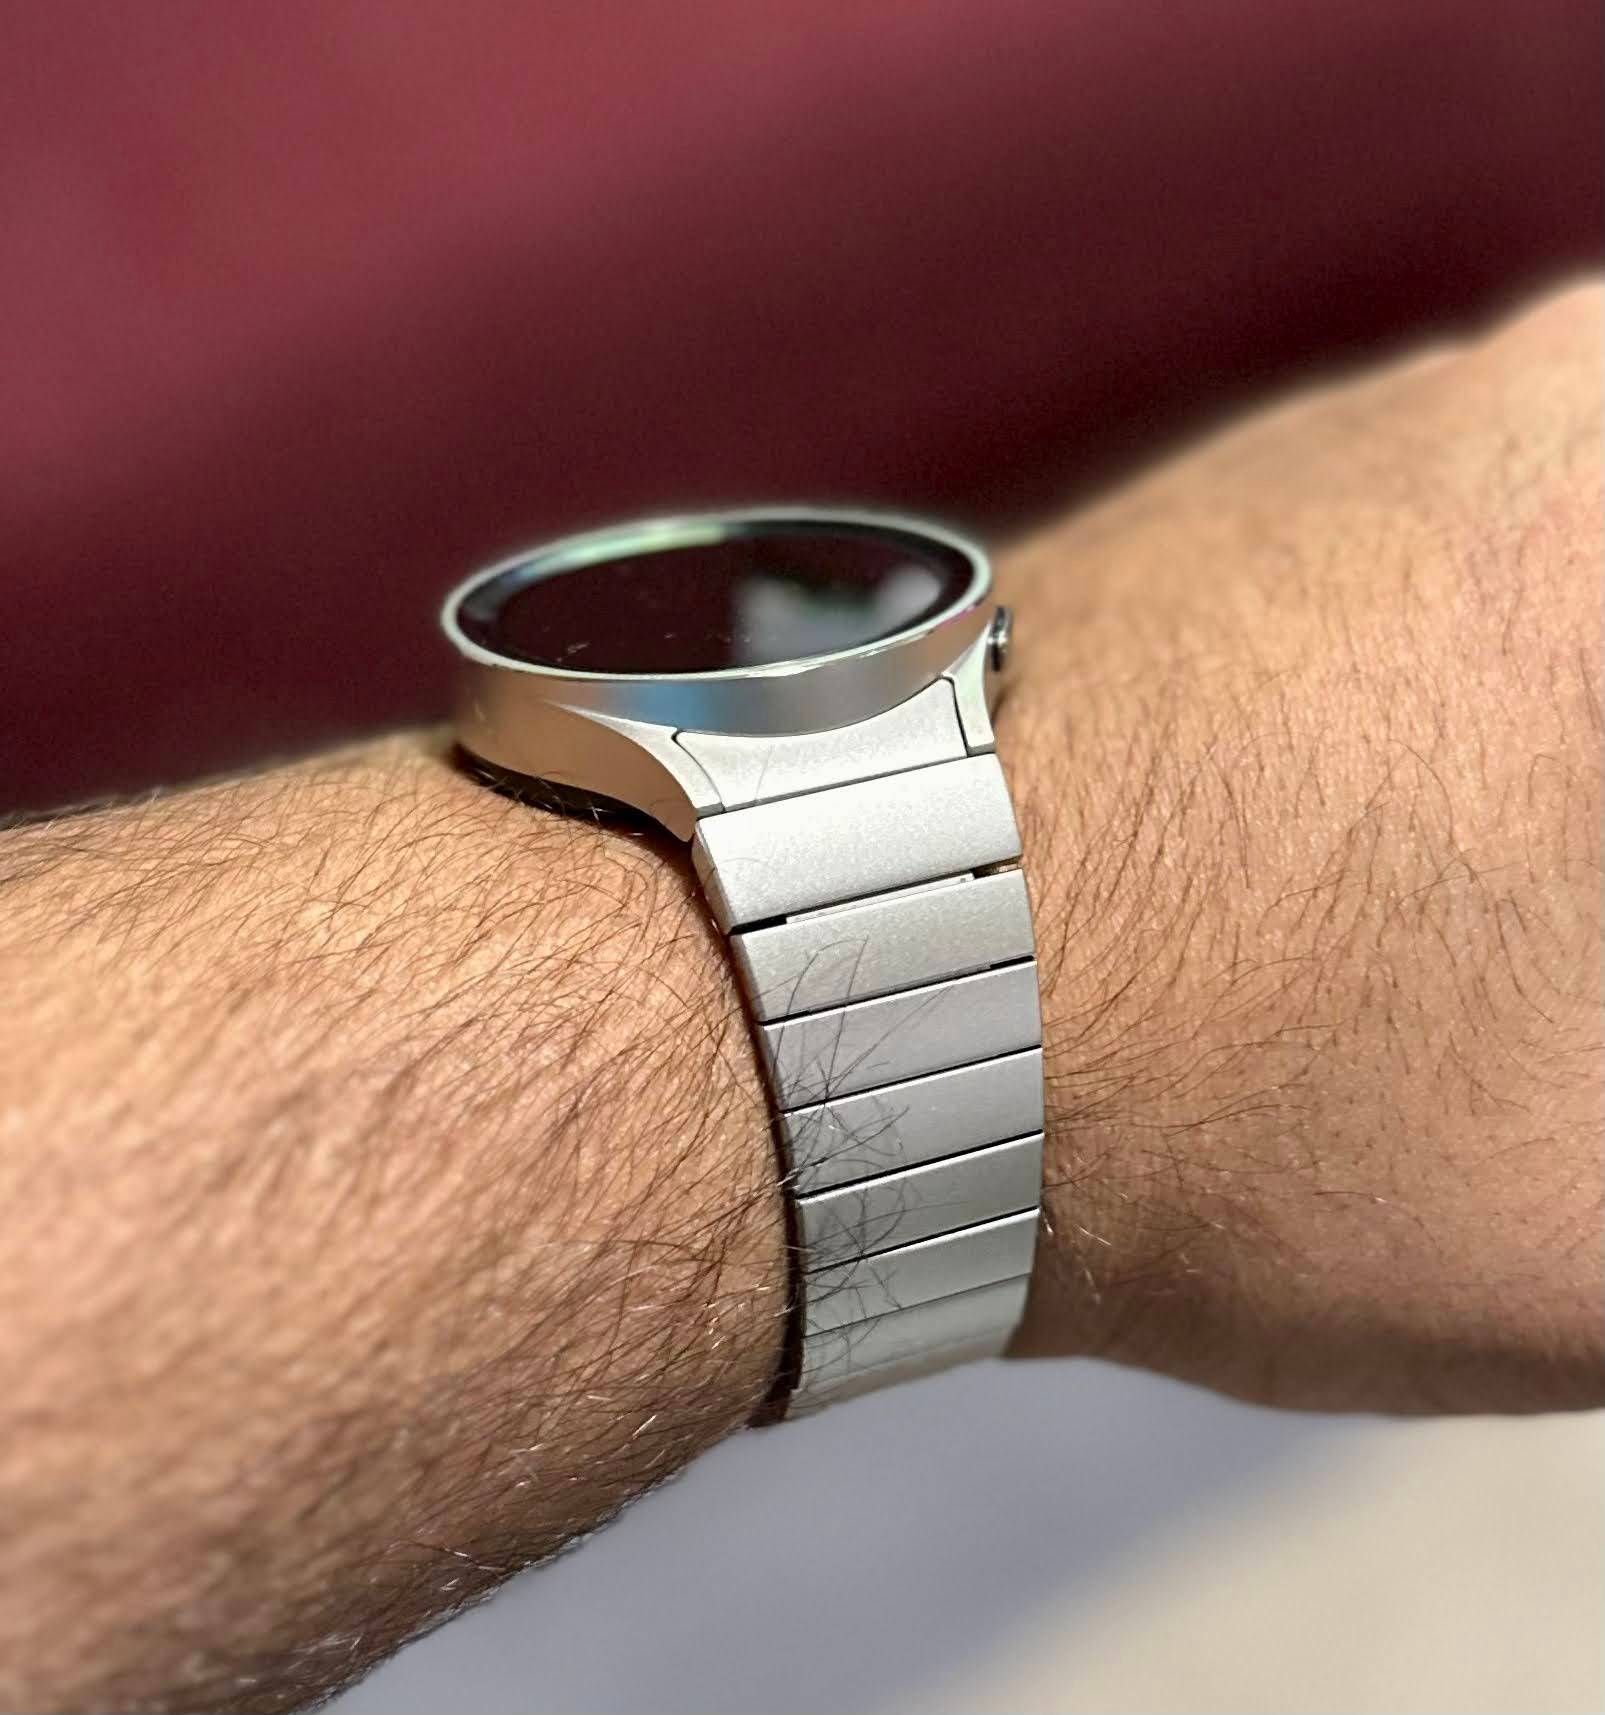 Got this titanium bracelet for my watch 5 pro in 2$ from local